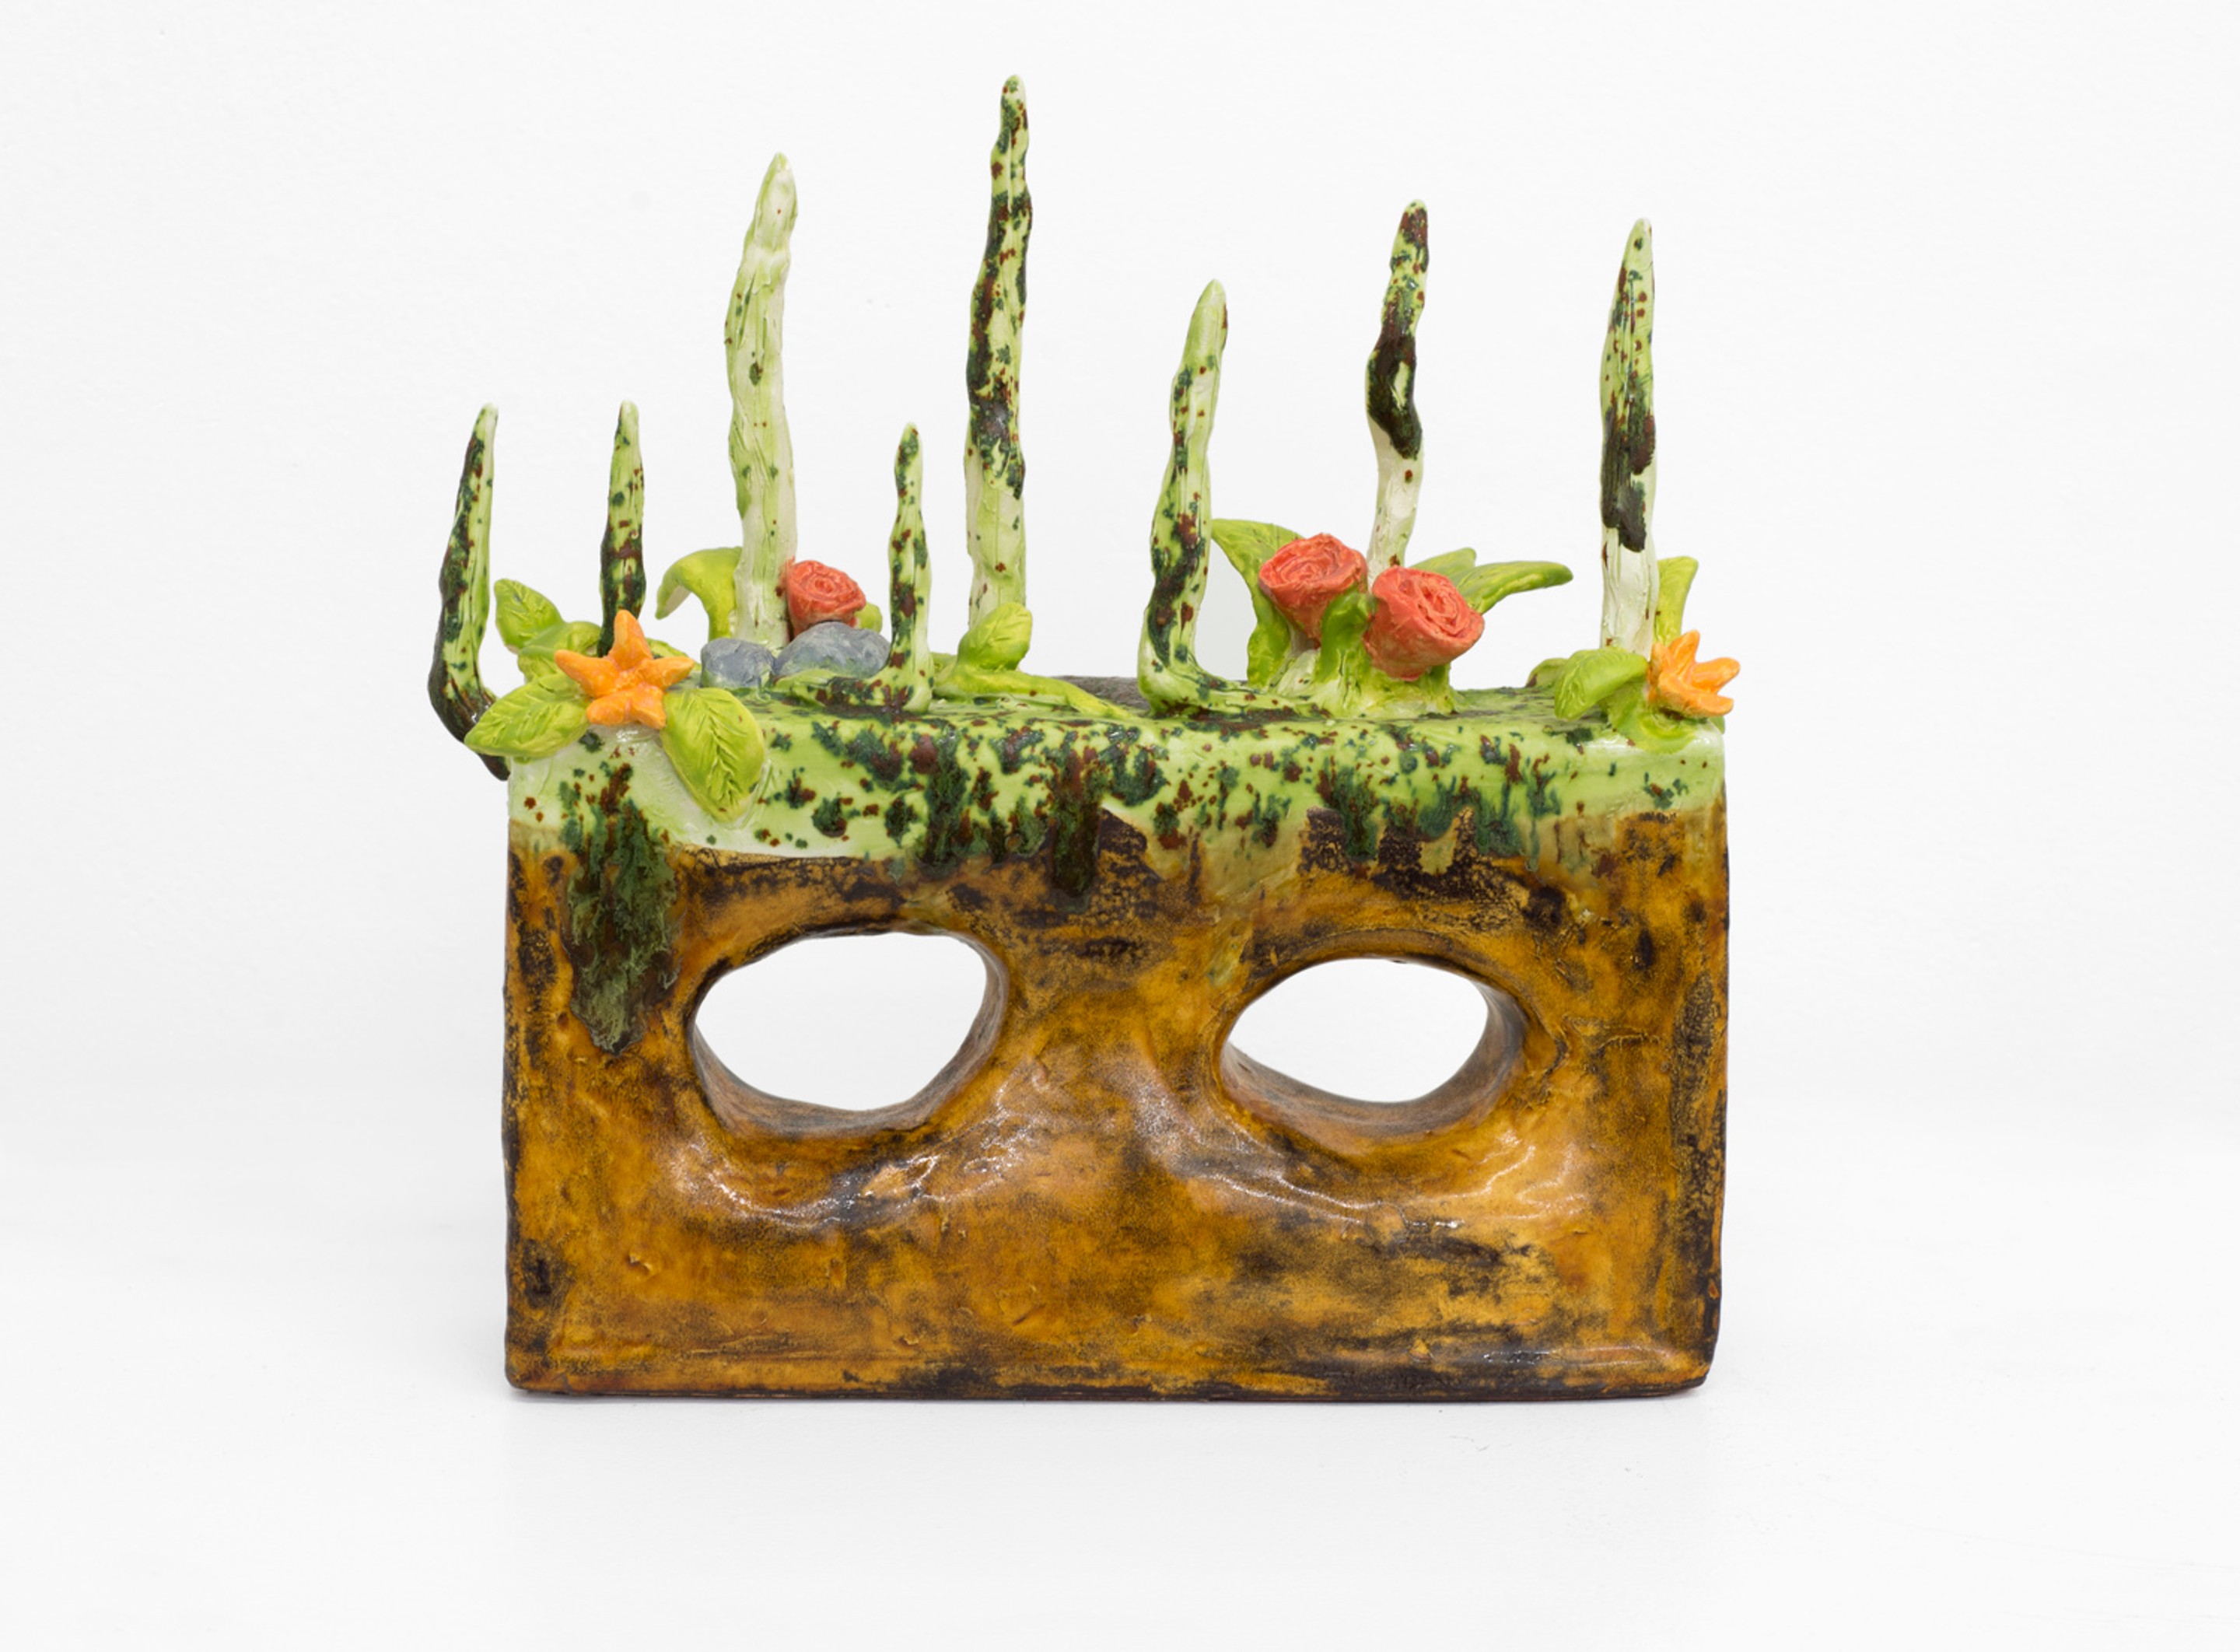 From the Credenza (2011)
Glazed ceramic
10.5h x 9.5w x 2.5d inches